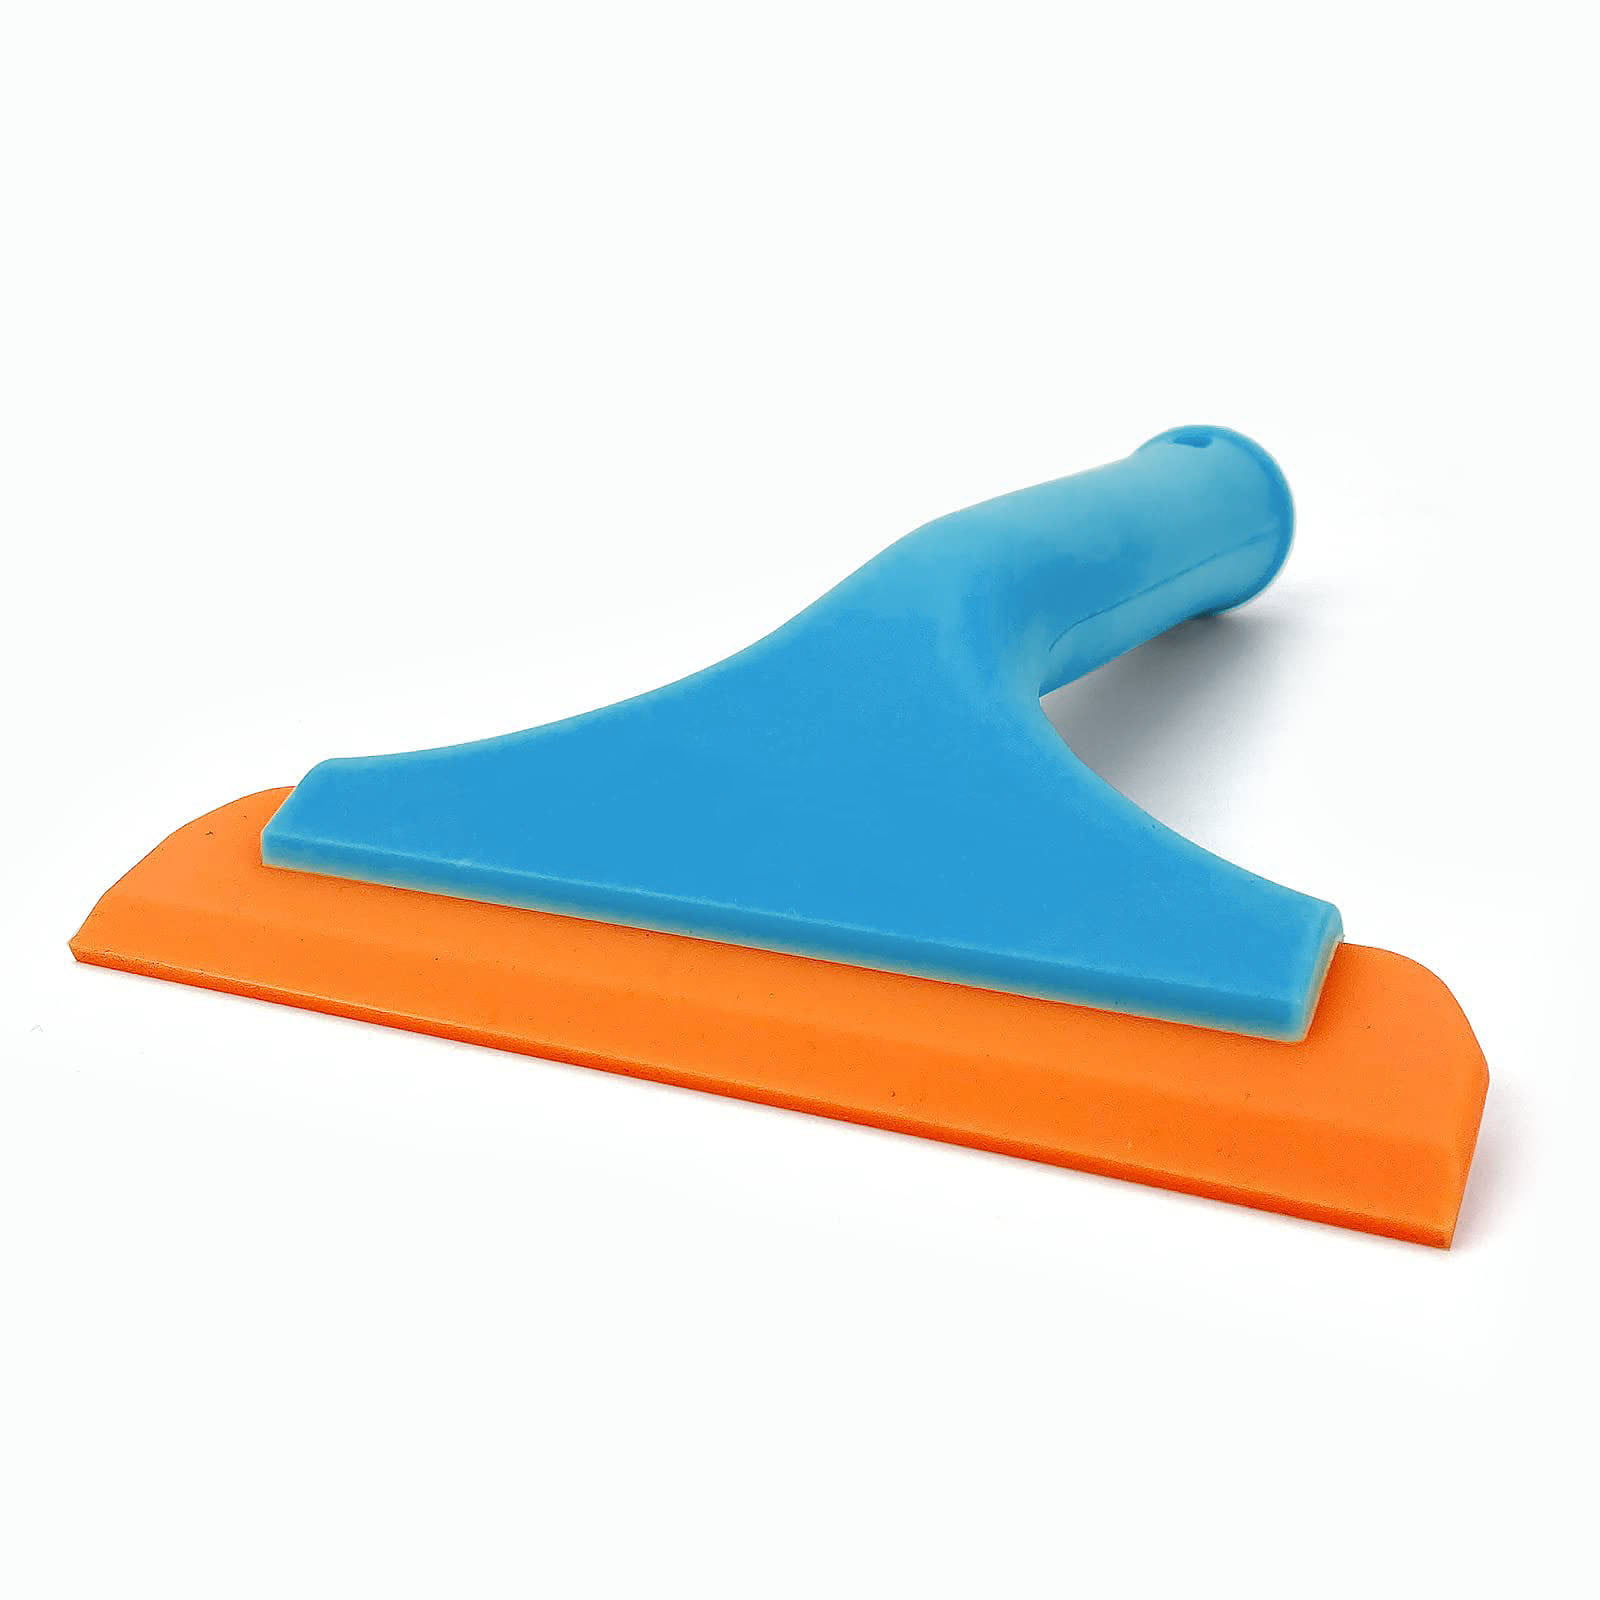 Squeegee - Handheld WaterBlade Squeegee For Quickly Drying, WeatherTech